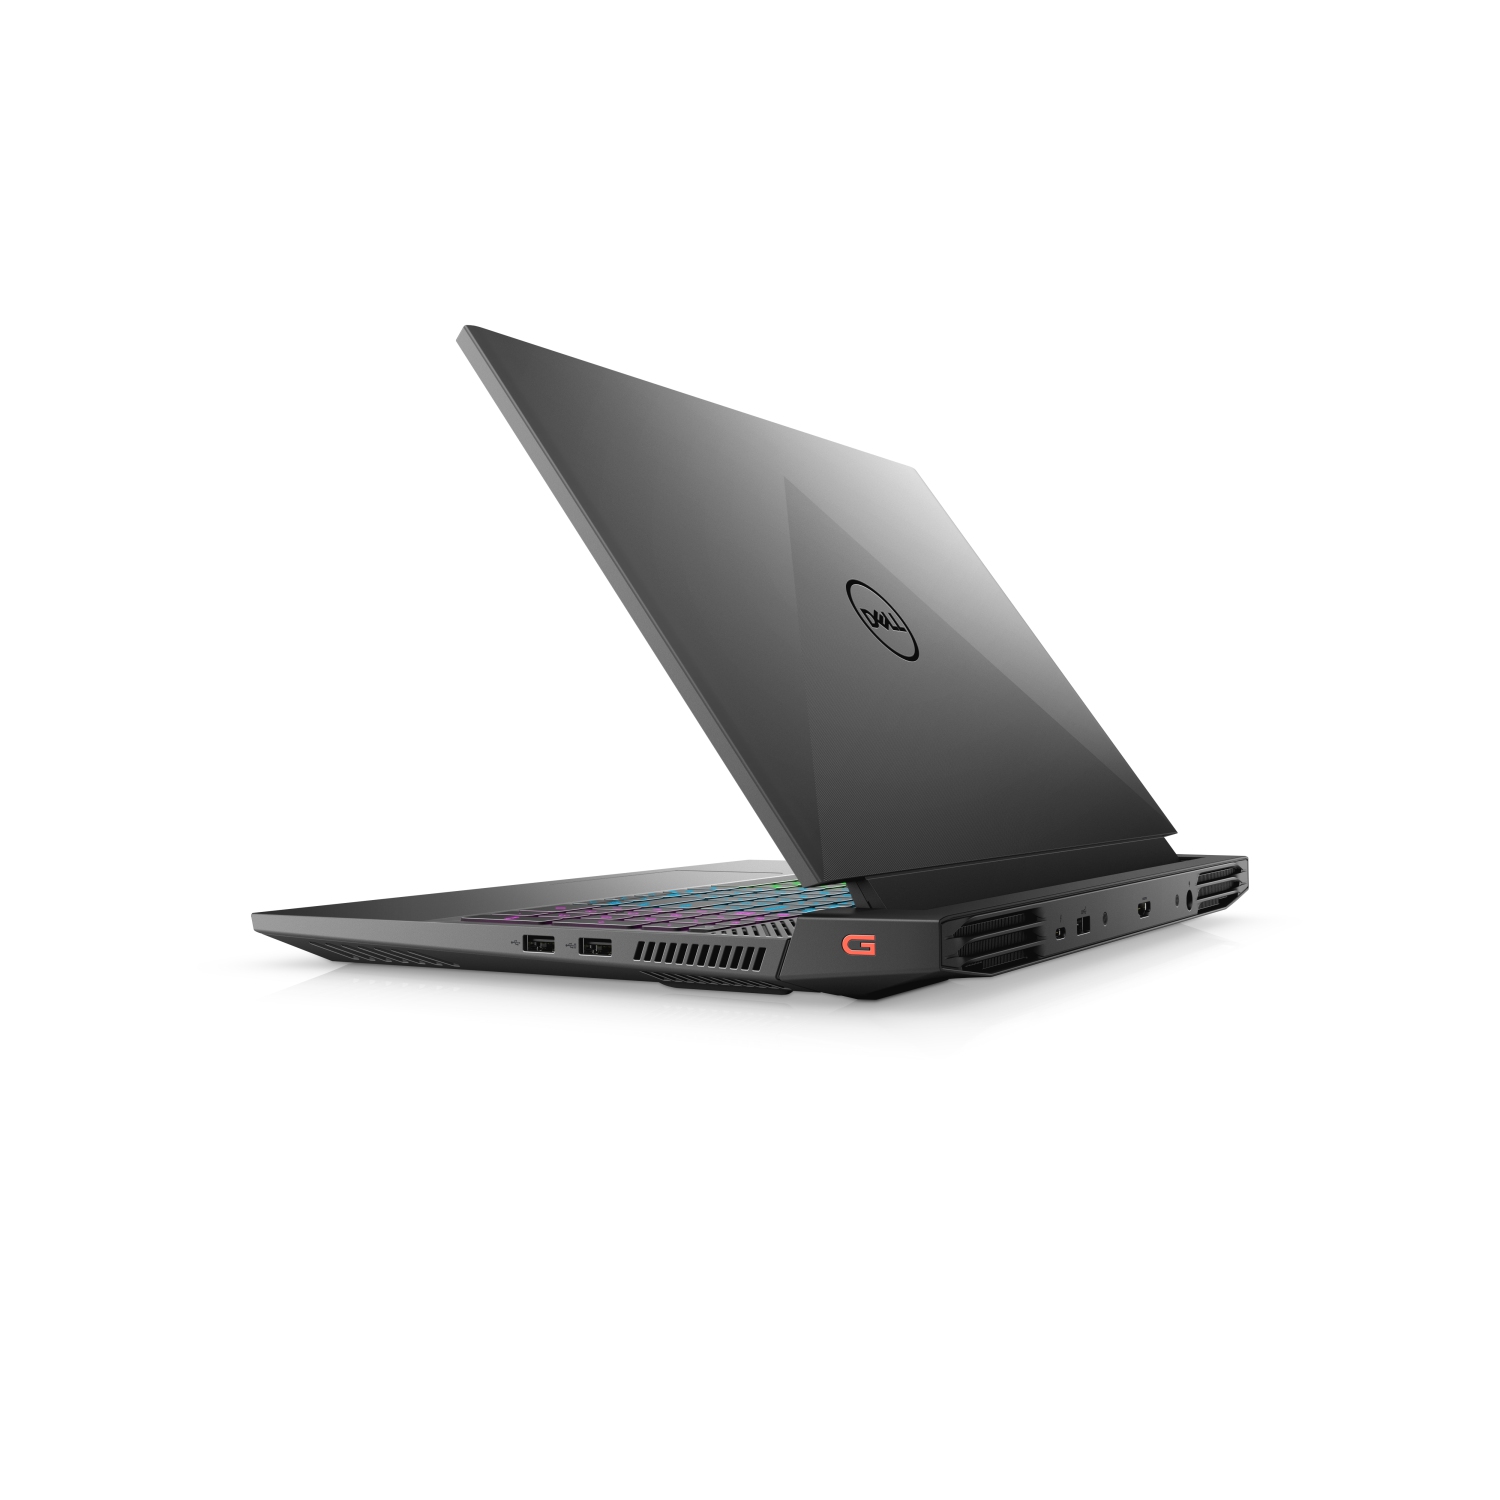 Refurbished (Excellent) - Dell G15 5511 Gaming Laptop (2021), 15.6" FHD, Core i7 - 256GB SSD - 8GB RAM - RTX 3050, 8 Cores @ 4.6 GHz - 11th Gen CPU Certified Refurbished